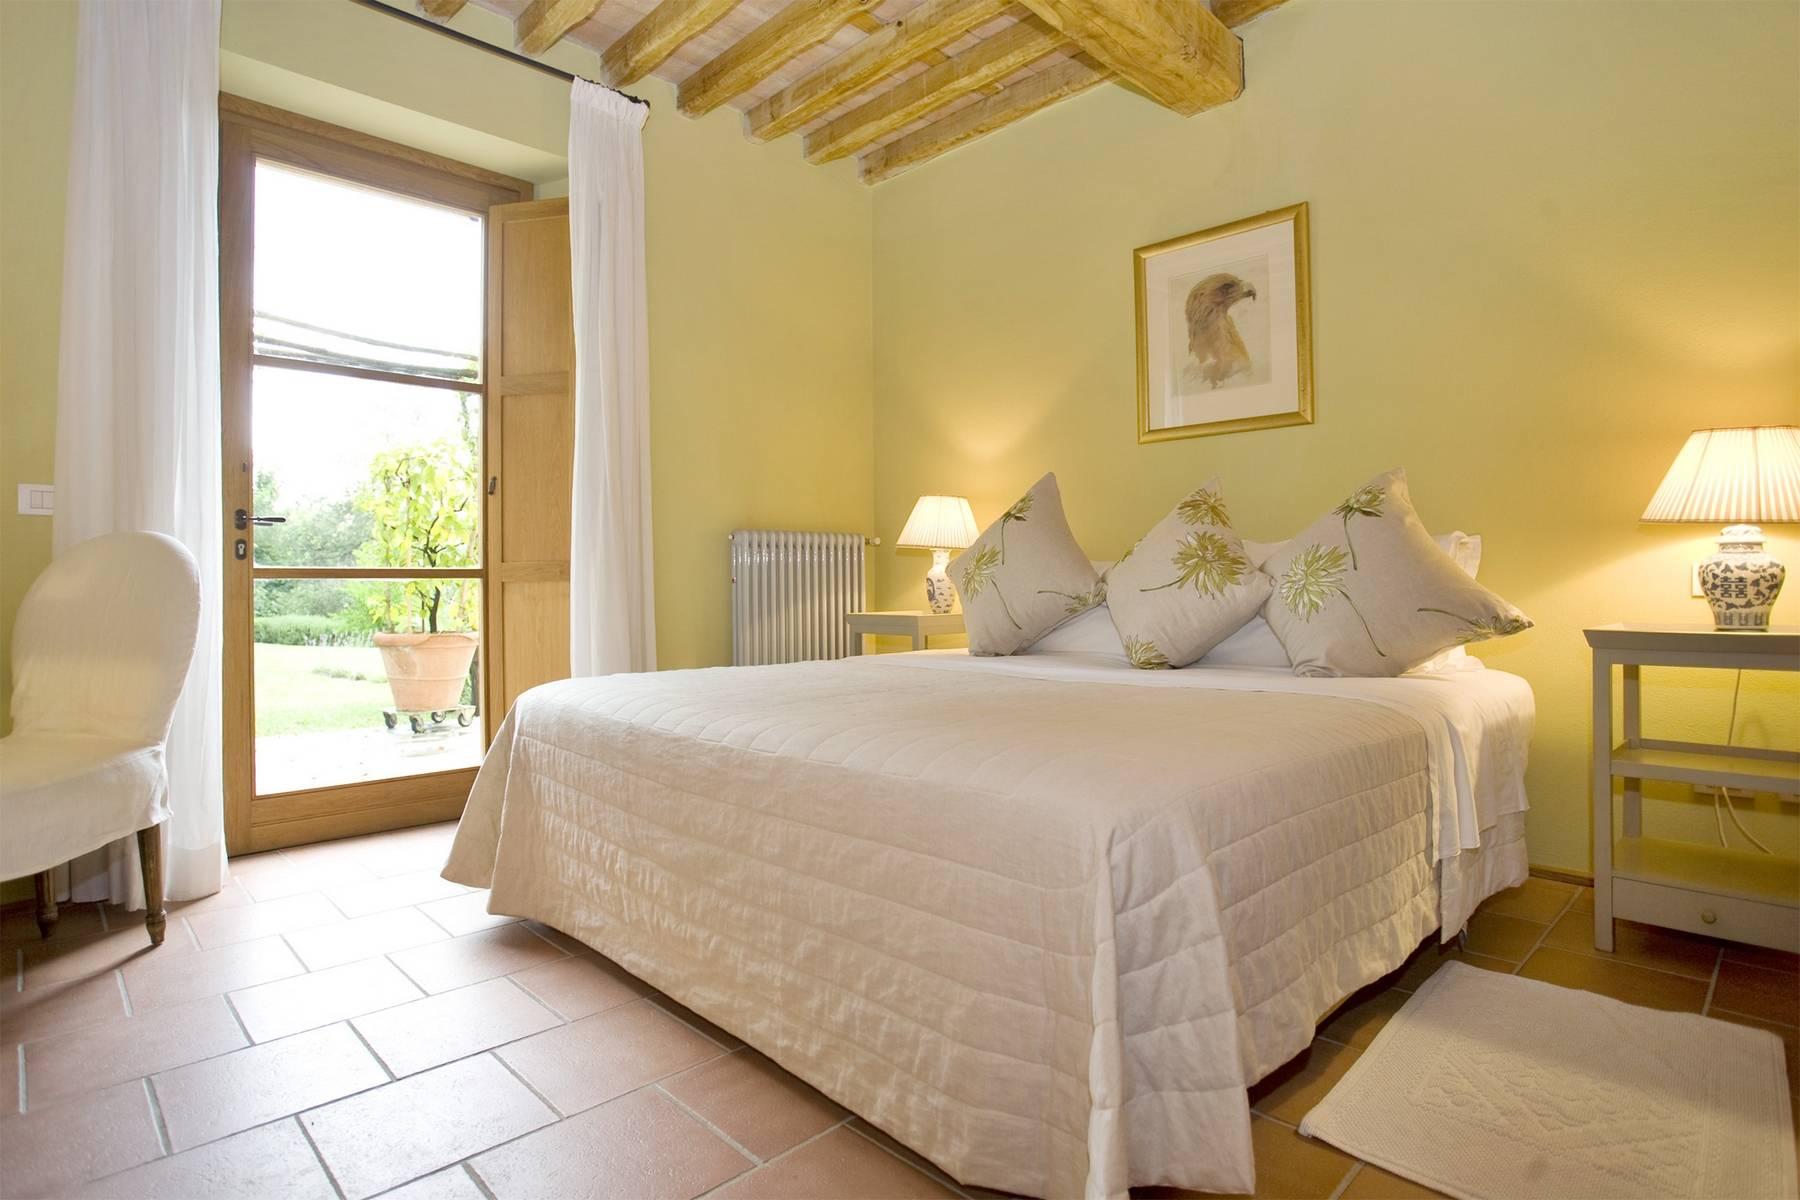 Remarkable luxury villa with olive grove and vineyard in the countryside of Lucca - 22